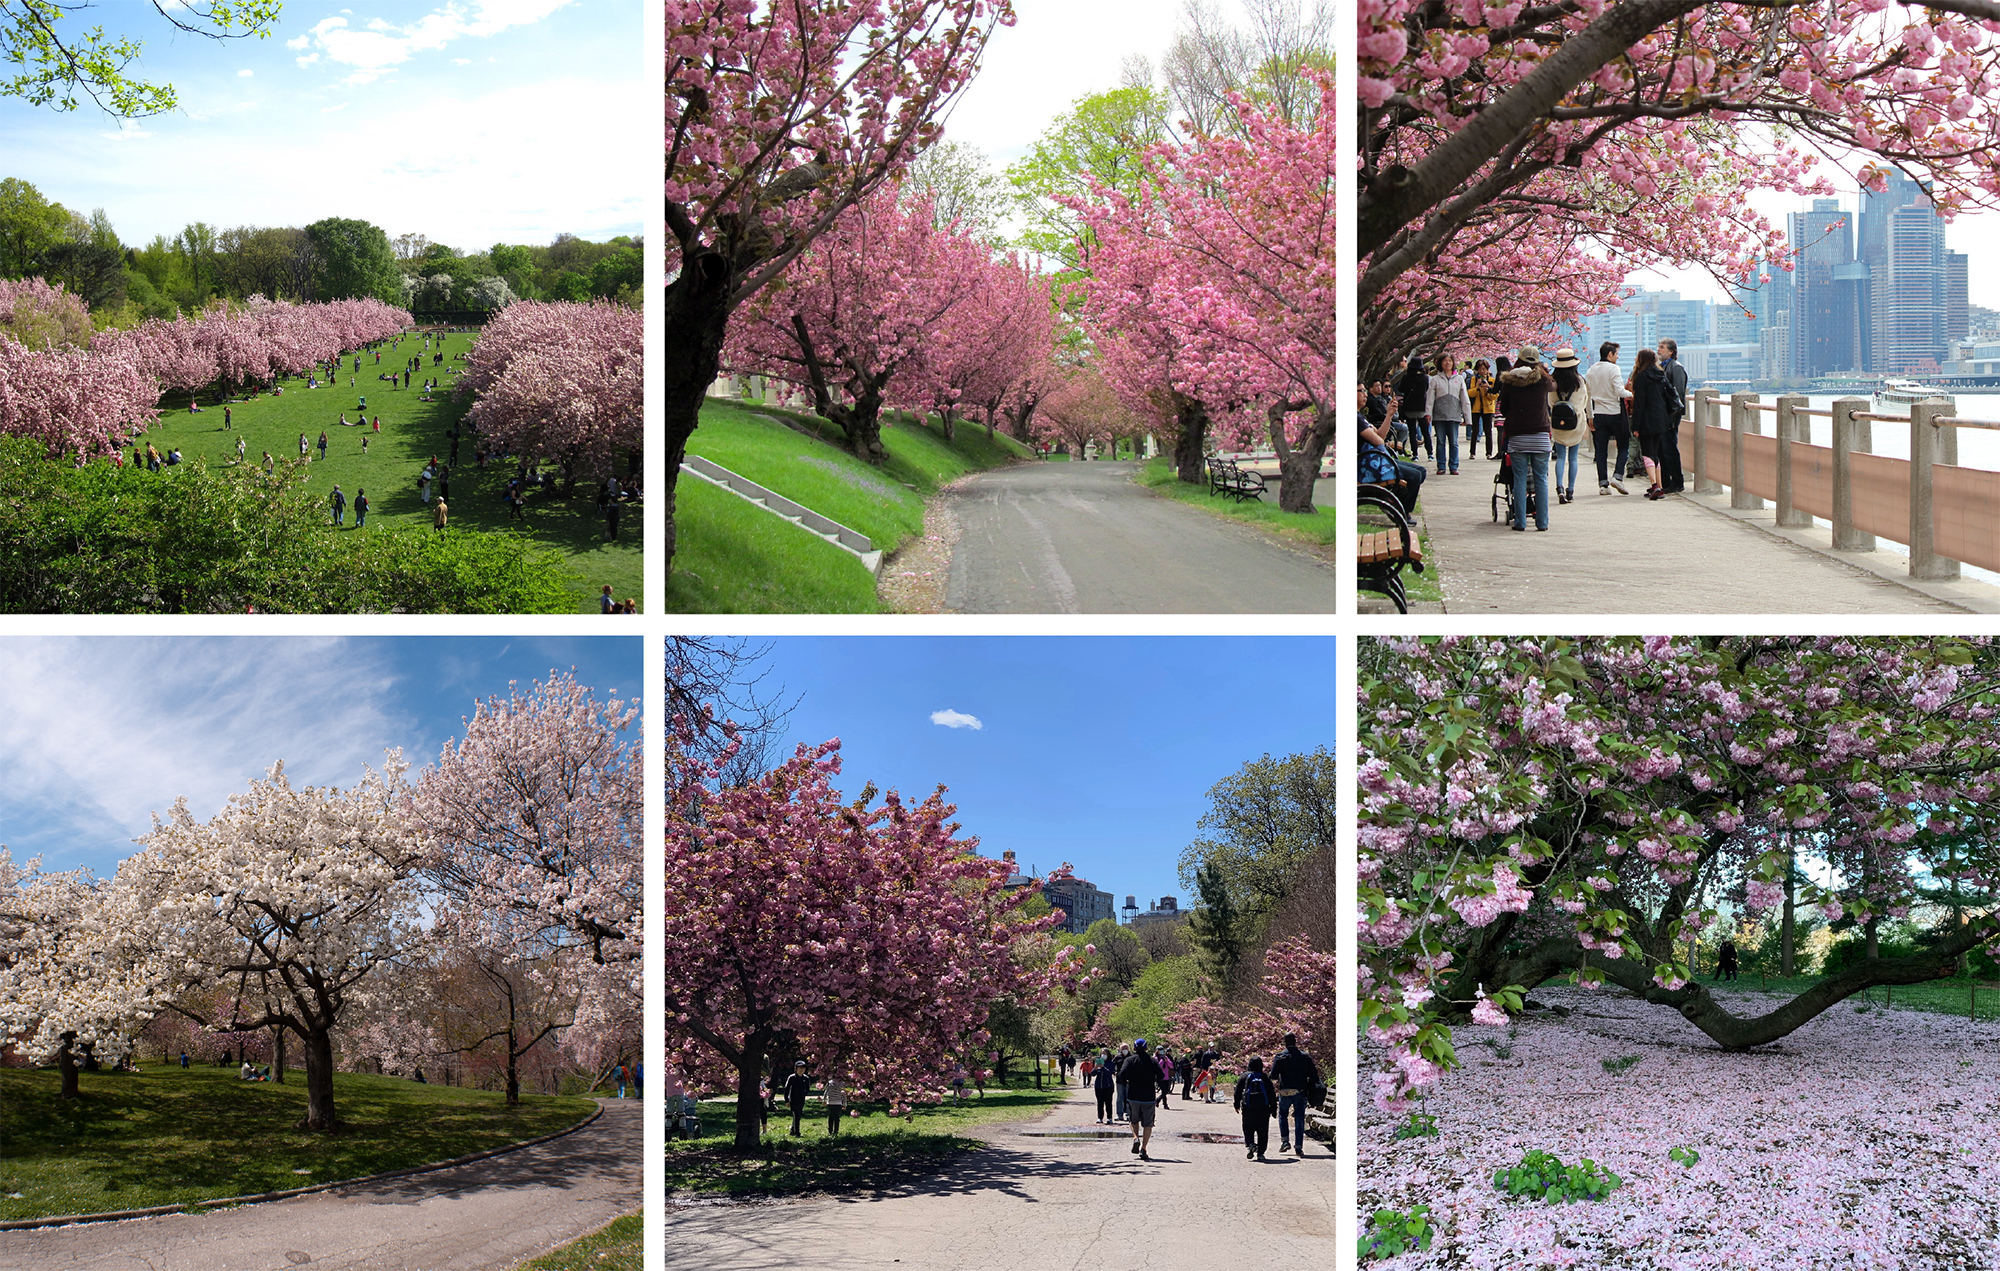 Visiting Park With the Most Cherry Blossoms, Worth It + Photos